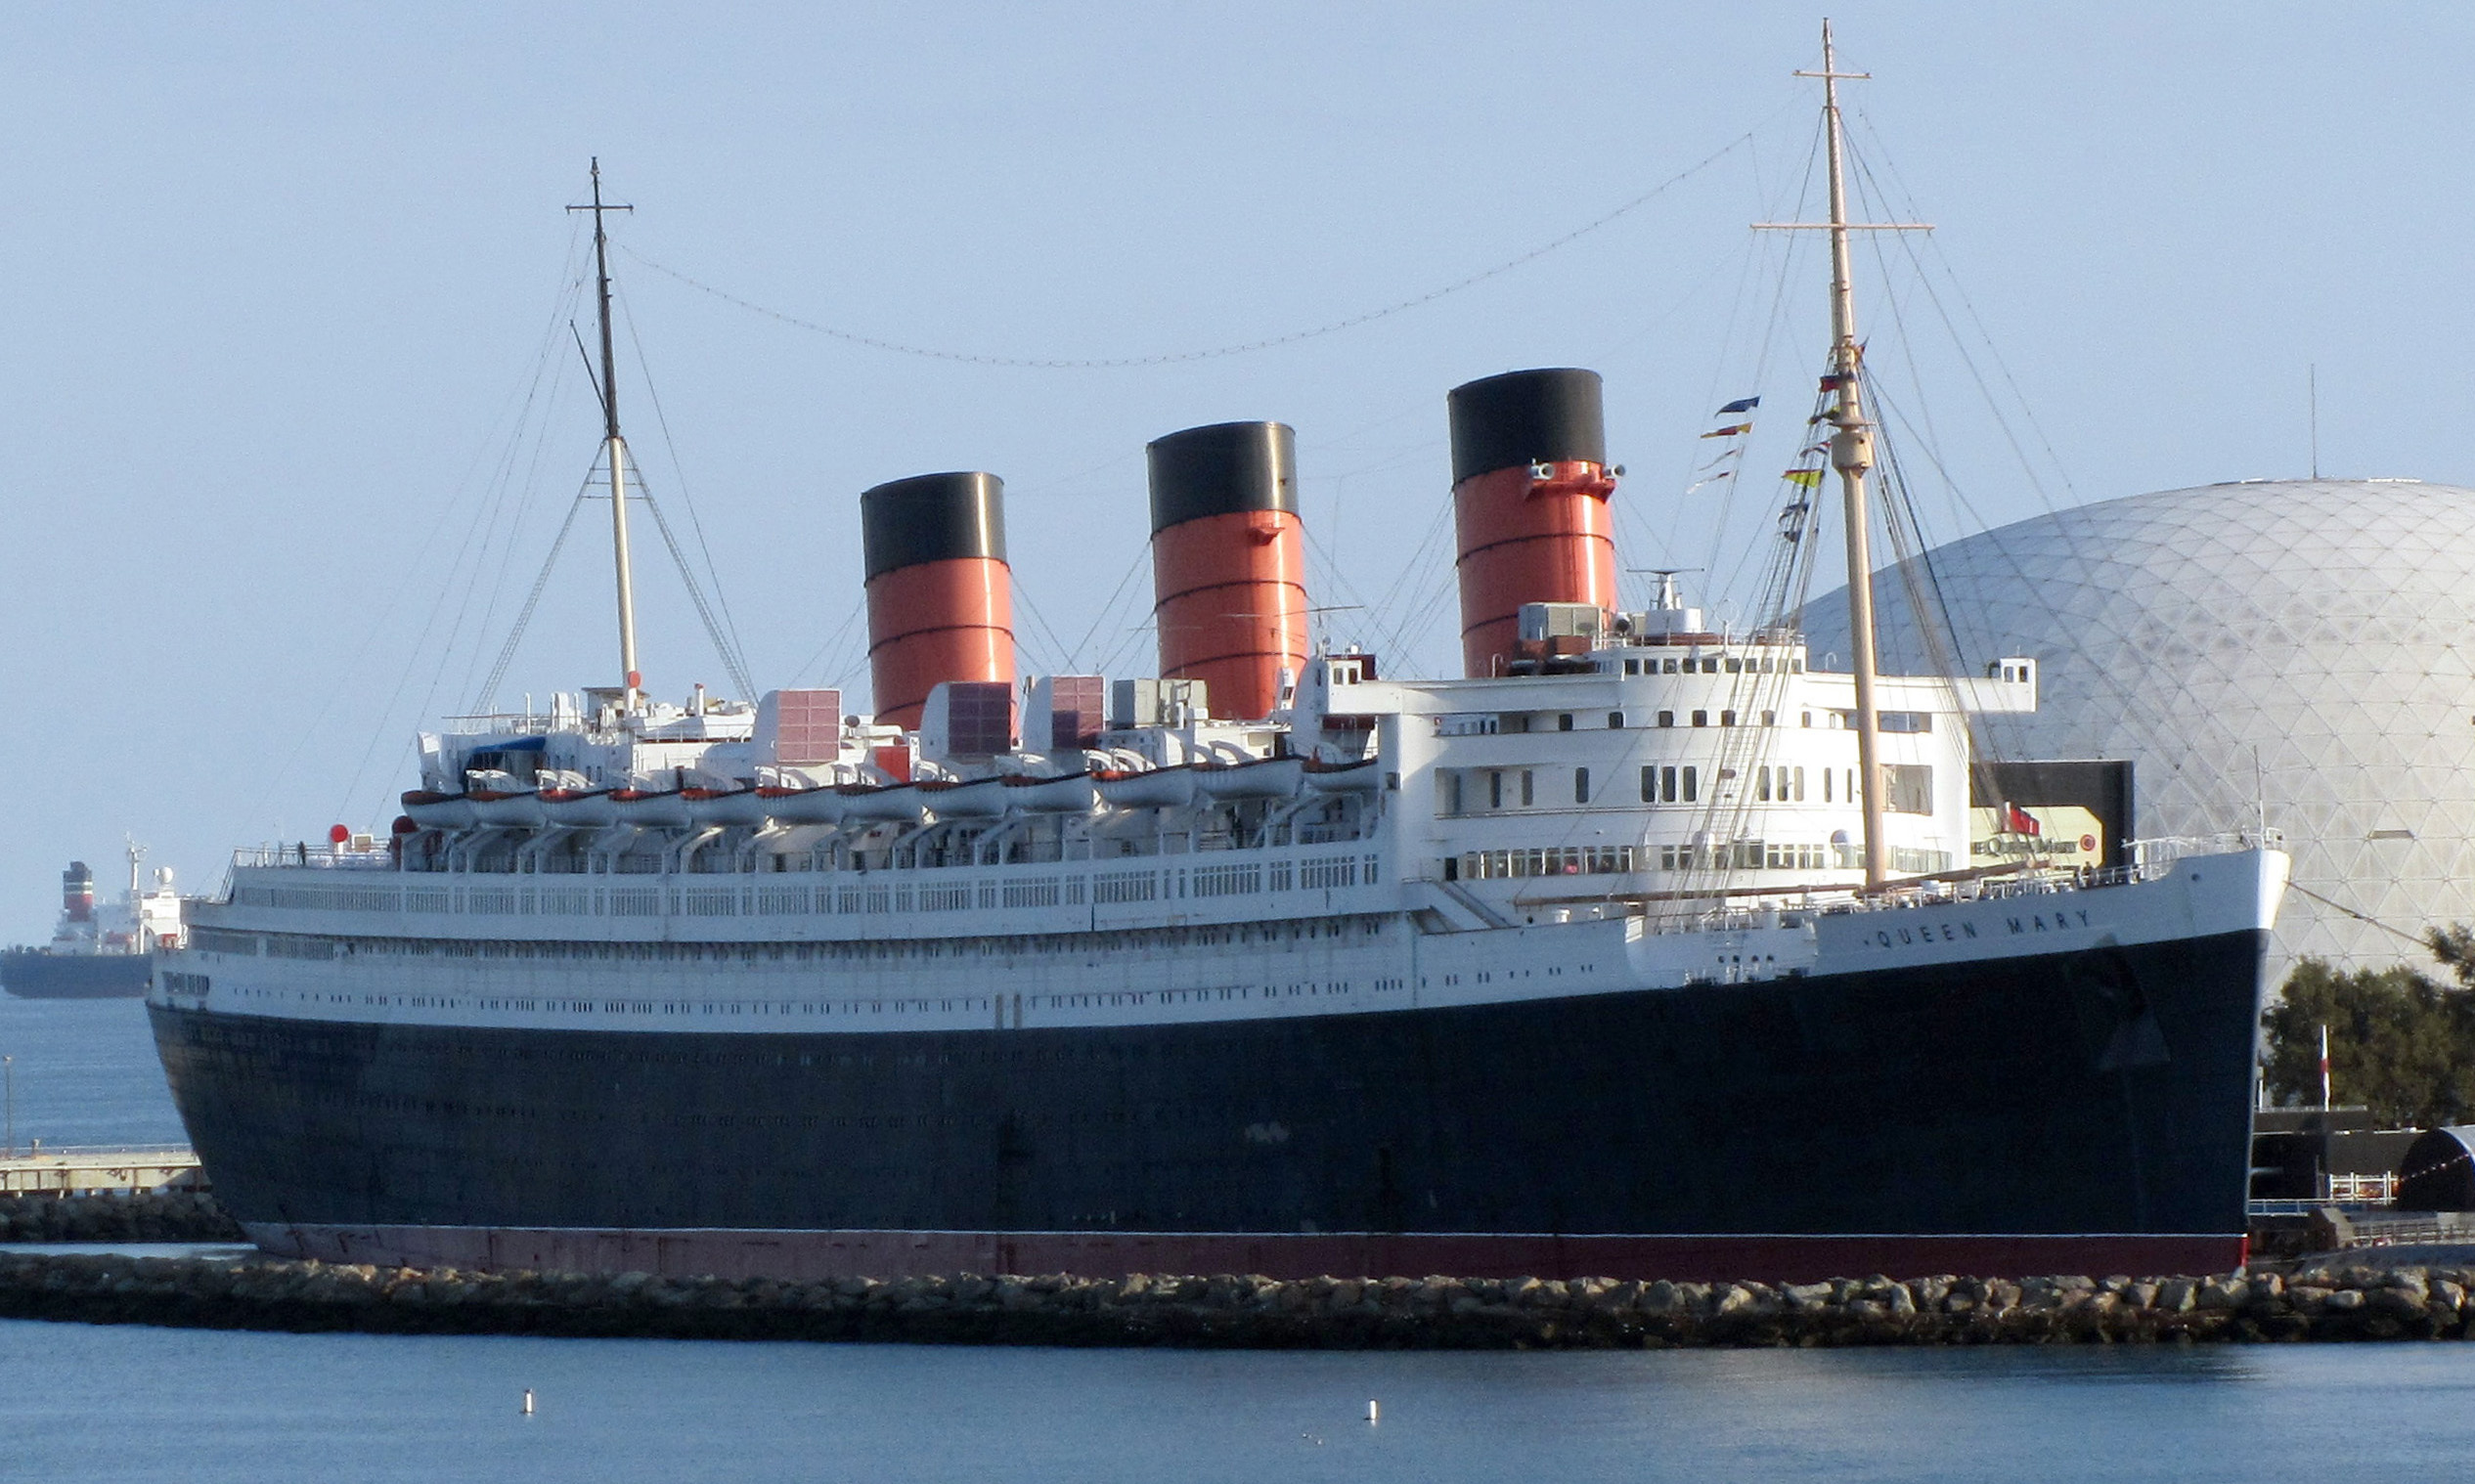 The Greatest Existing Ocean Liner: The R.M.S. Queen Mary